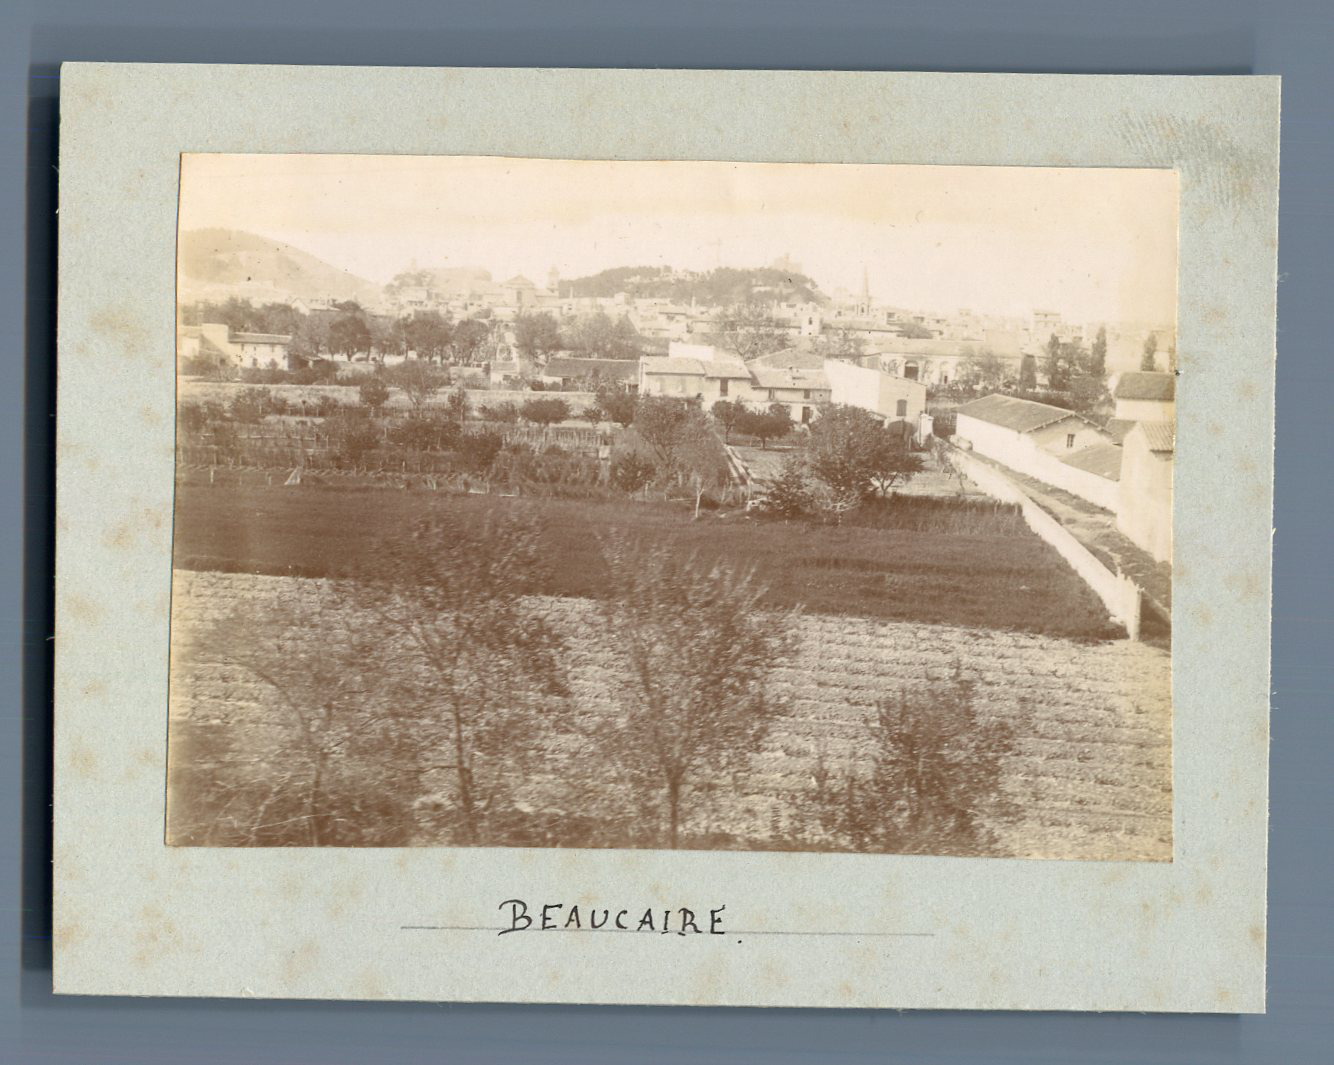 France, Beaucaire Vintage Print.  6x9 Citrate Print Circa 1900 